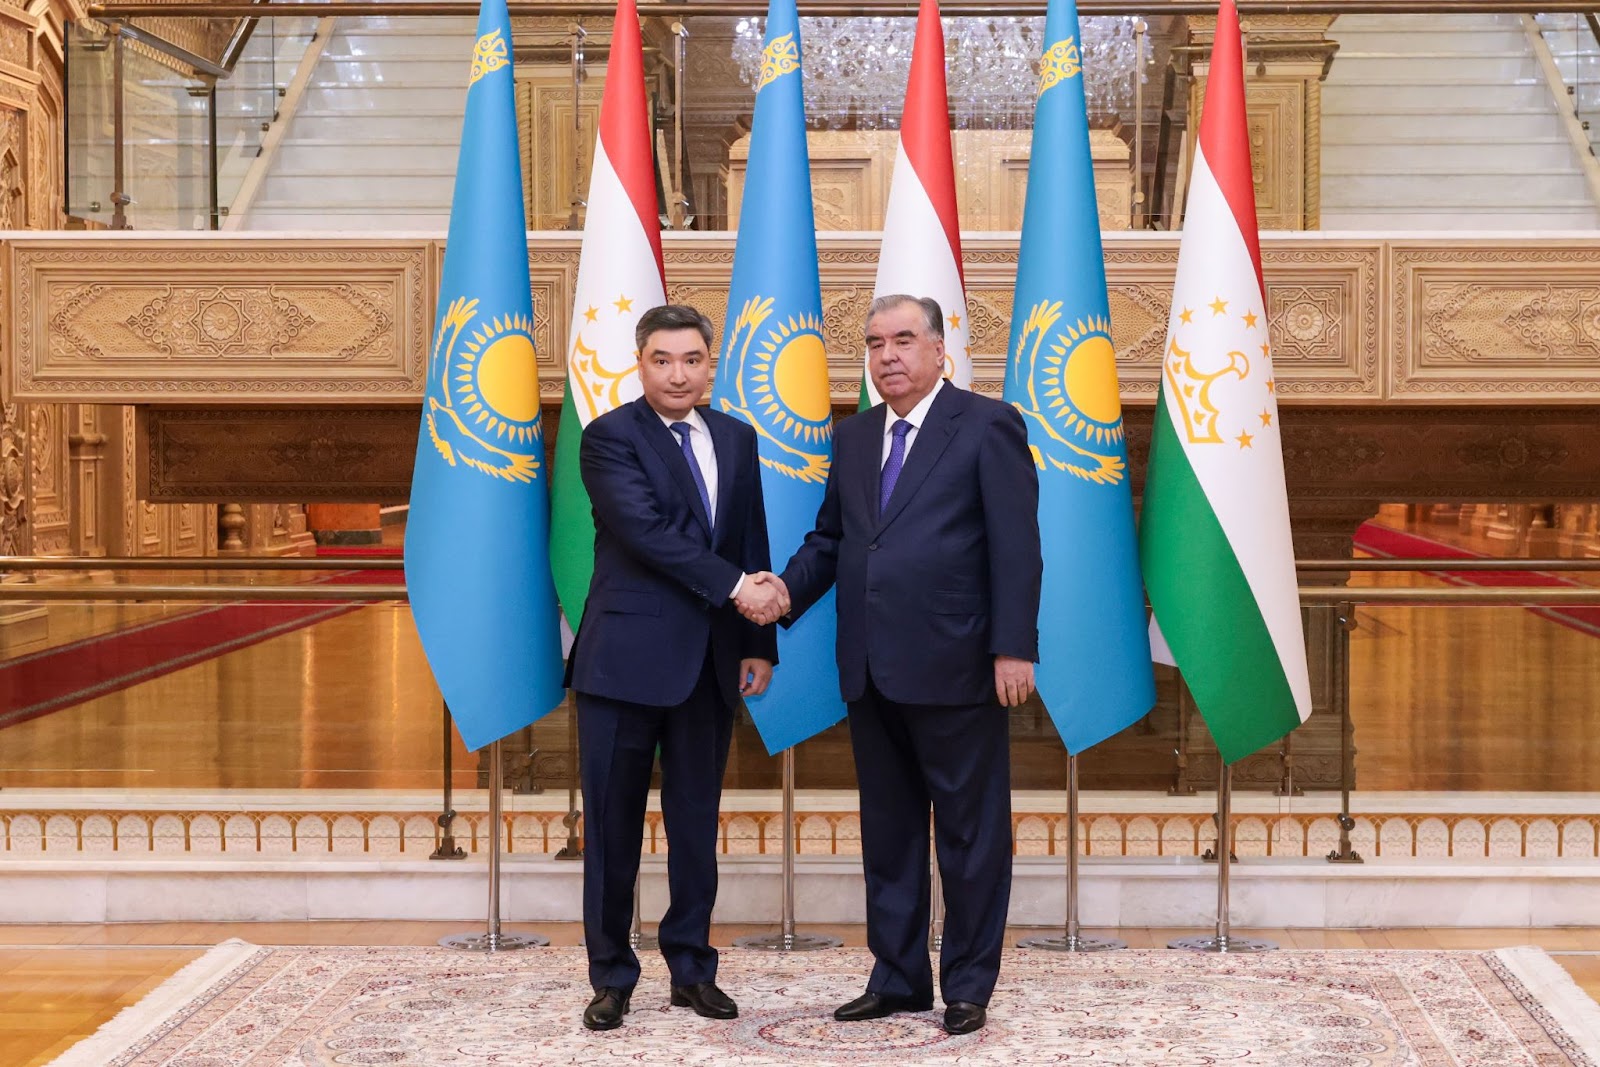 Olzhas Bektenov and Tajikistan's Head of Government discuss prospects for trade and economic cooperation